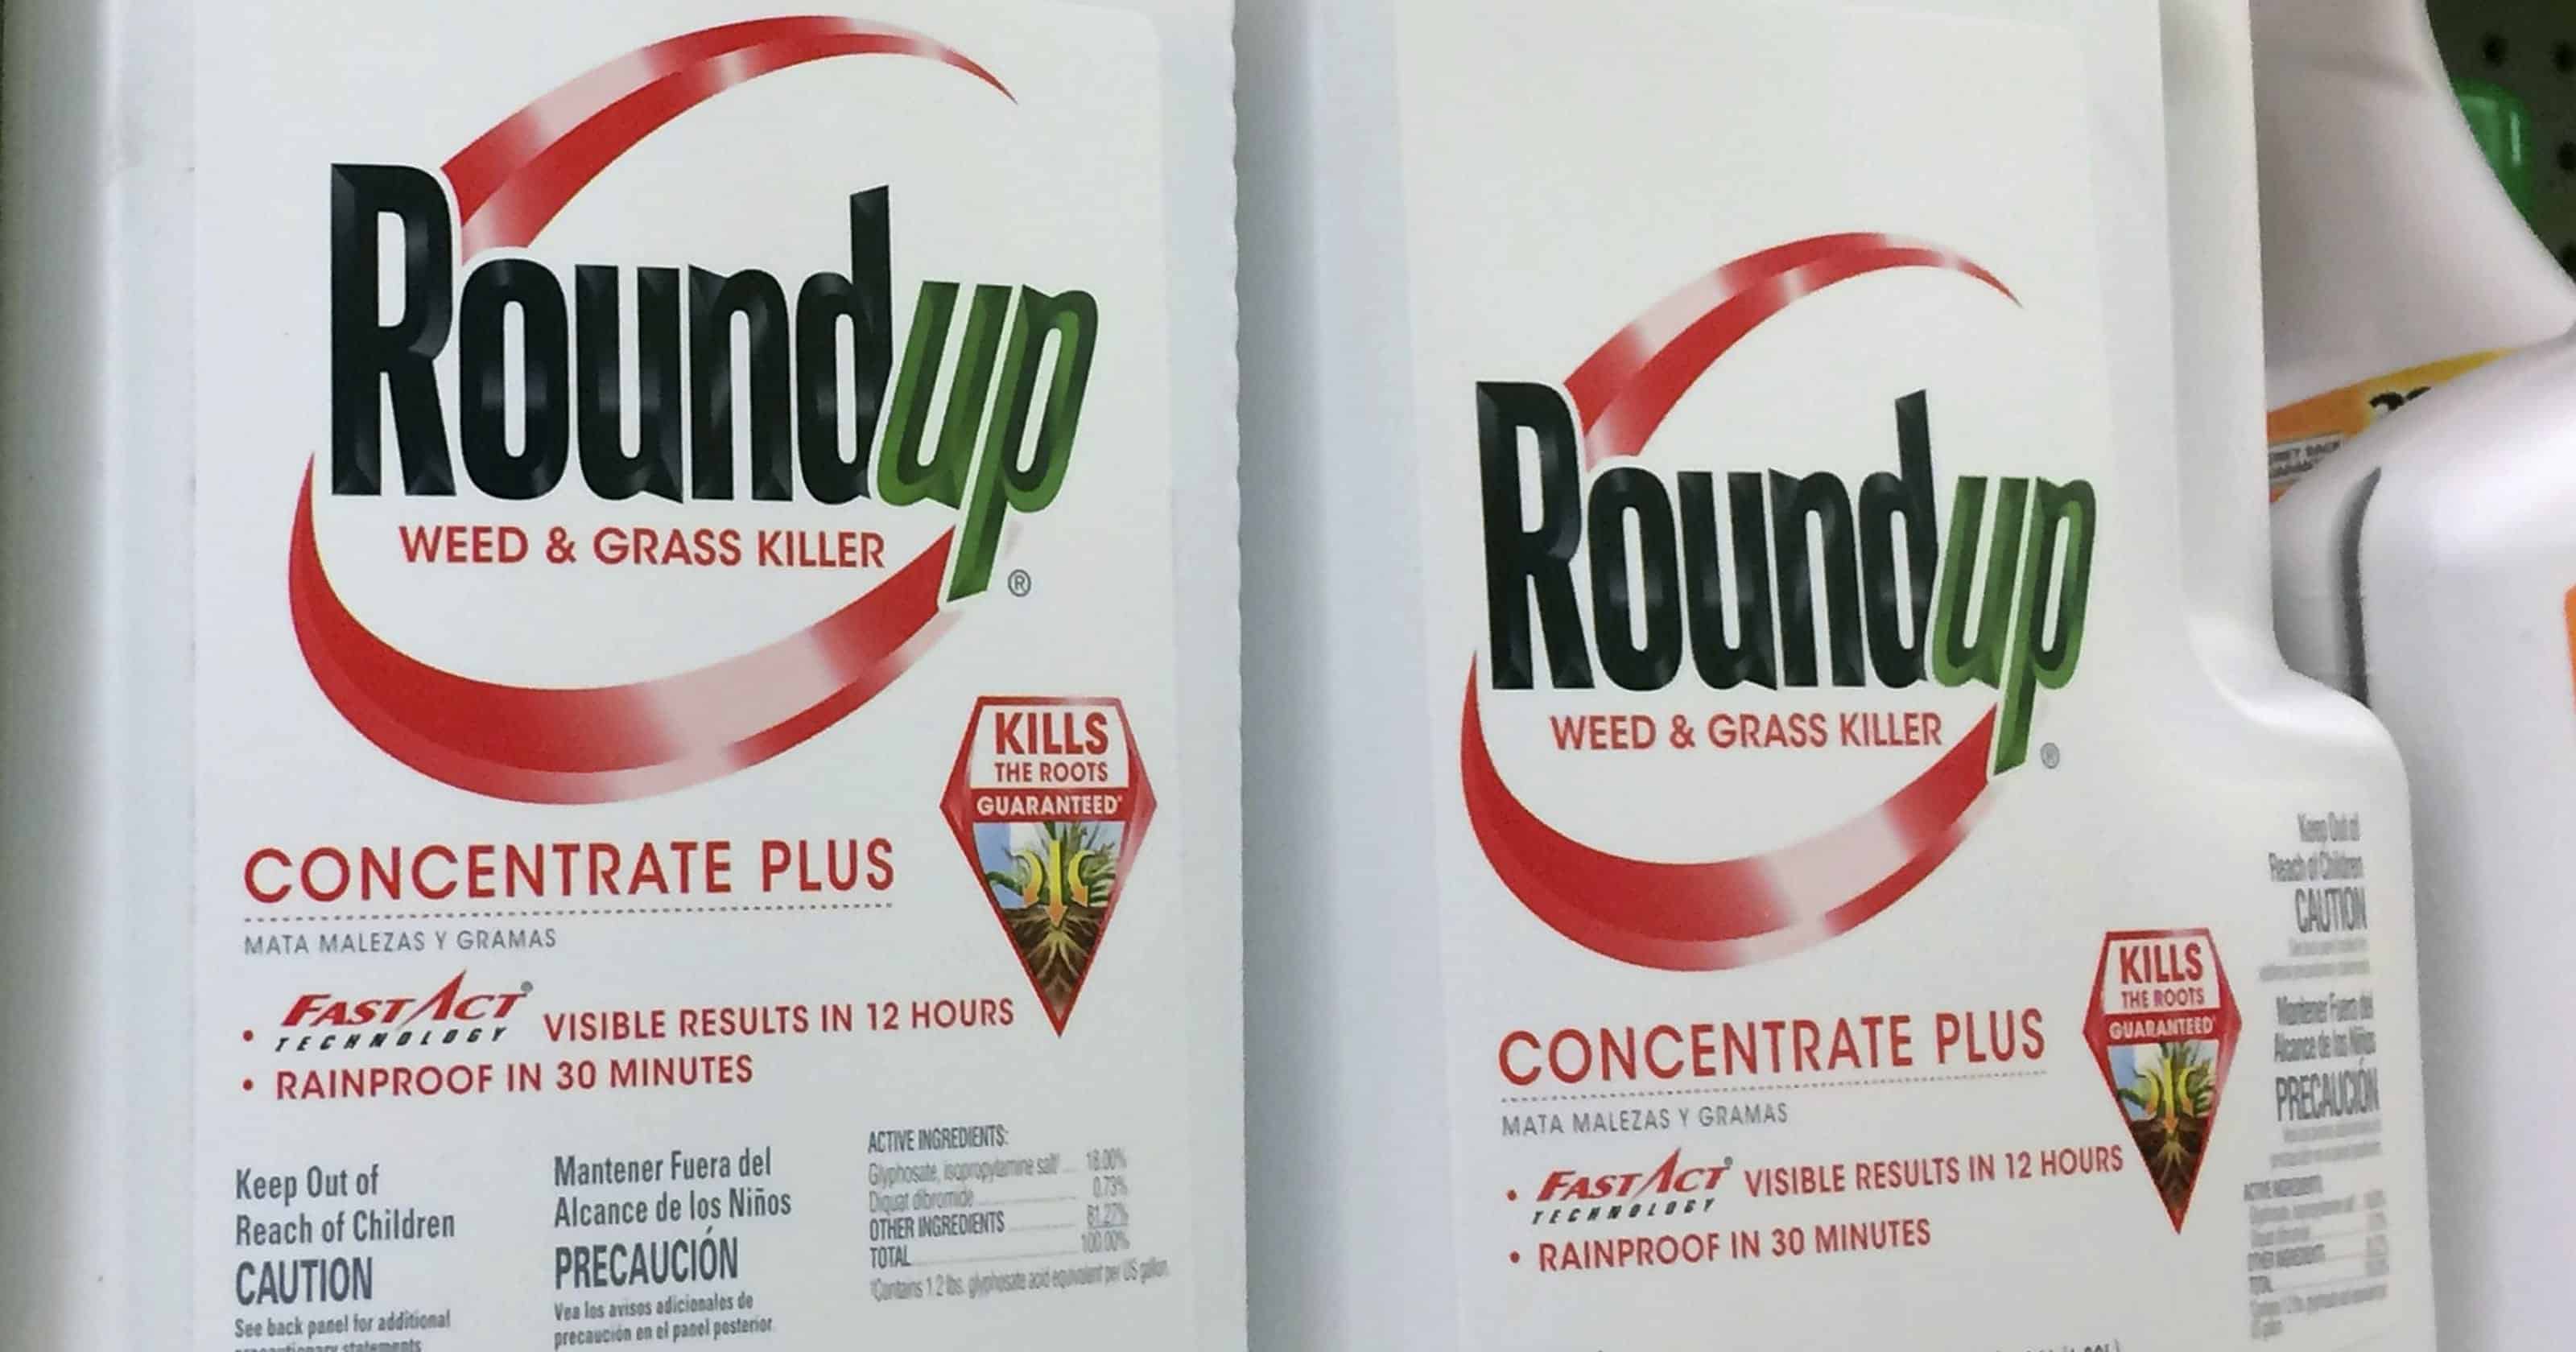 Roundup Injury Lawsuit Settlements Roundup Lawsuits & Payouts